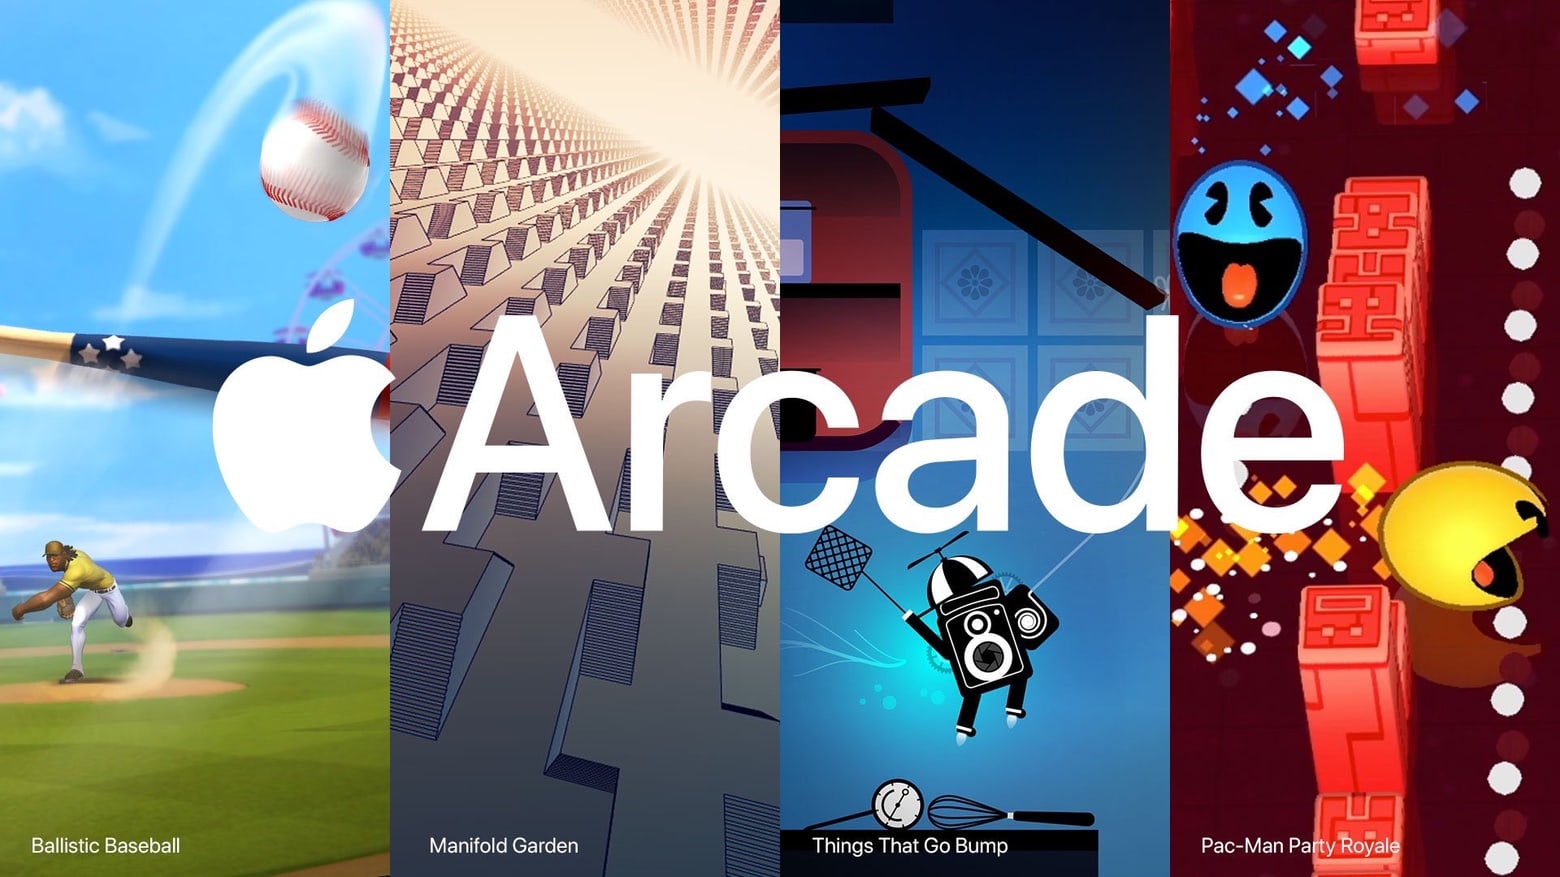 Apple Arcade adds player-vs-player Pac-man and baseball games, plus three more titles